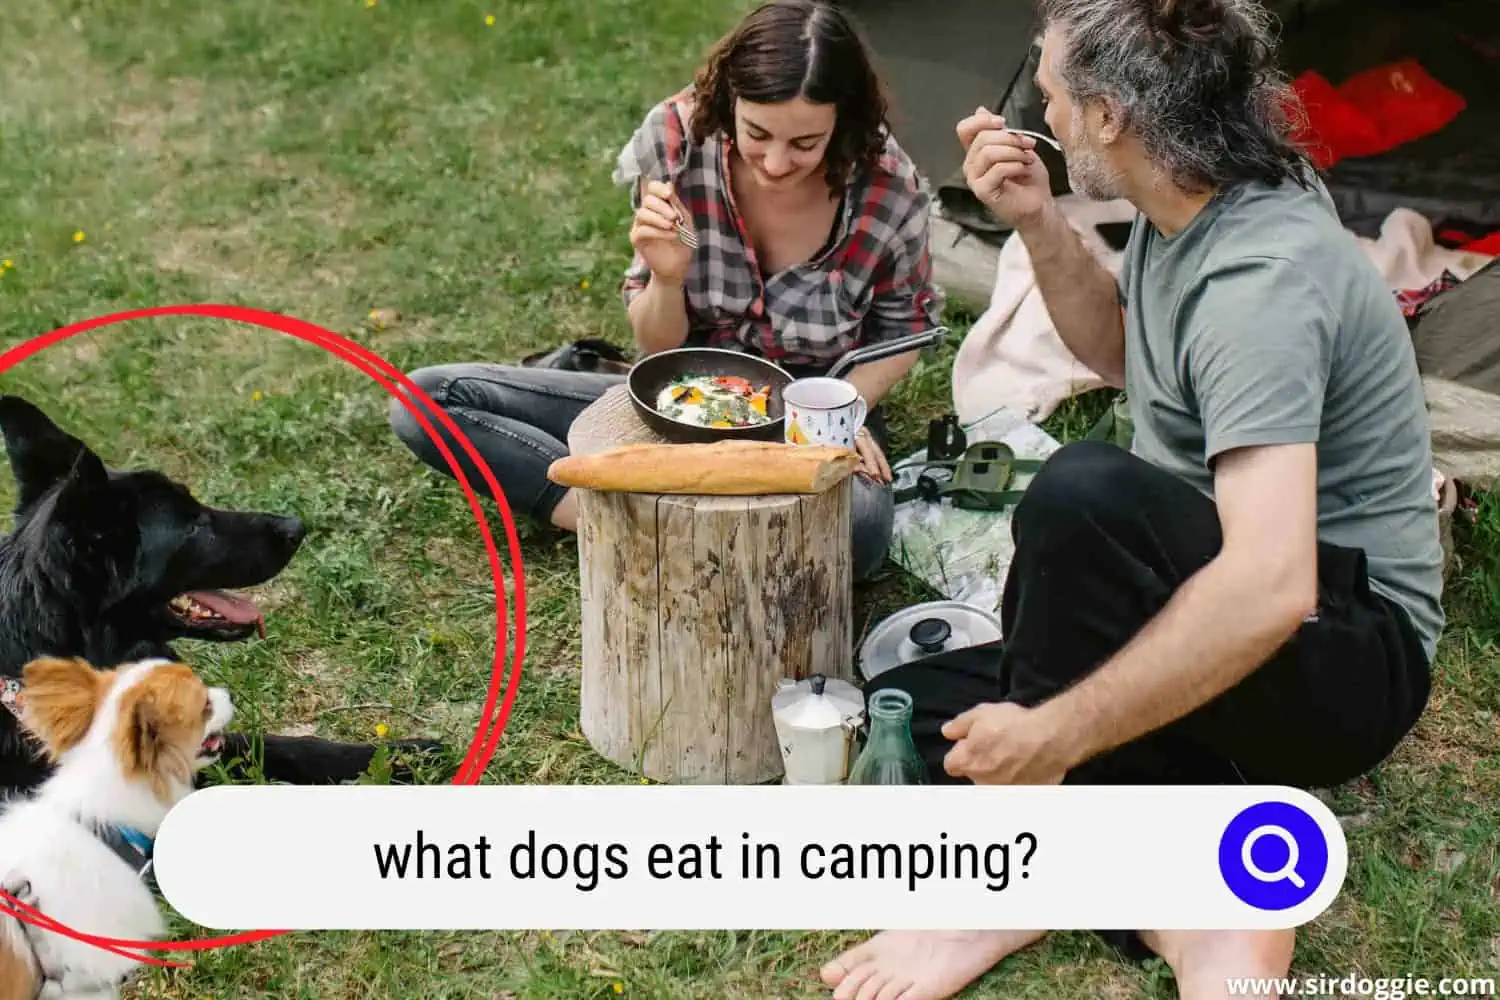 Couple Eating Together at the Campsite with Dogs